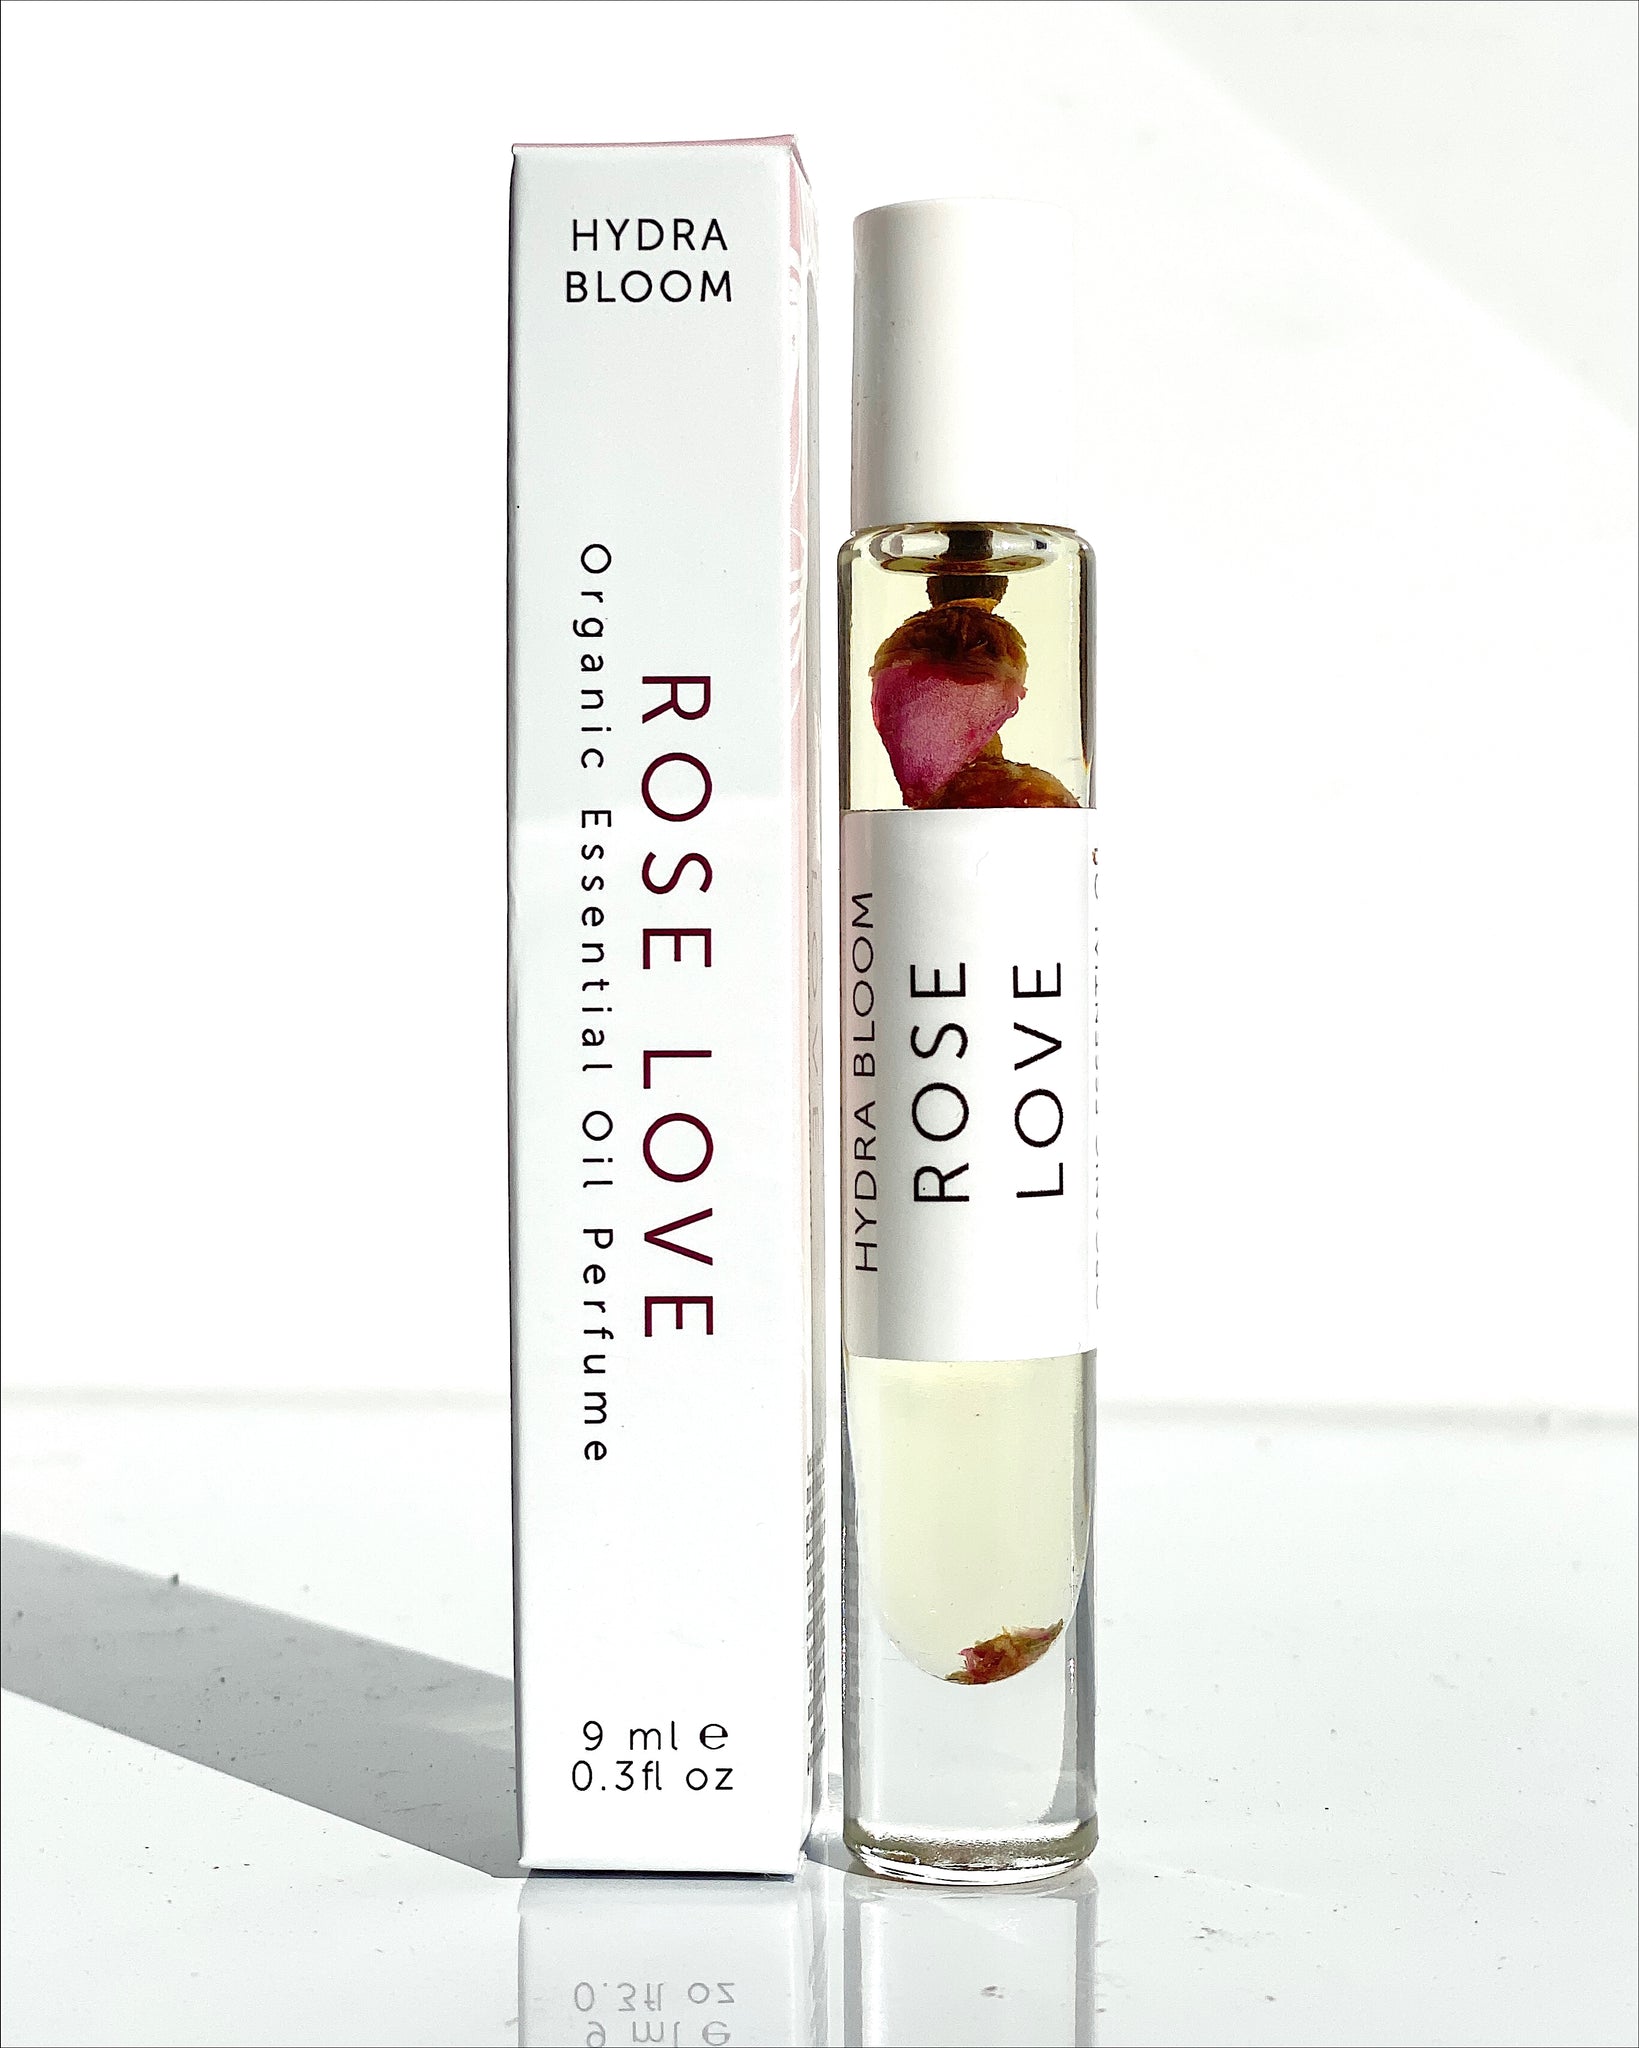 ROSE FLOWER INFUSED PERFUME. Stress reliever + mood lifter. 100% natural  alternative to chemical fragrances!